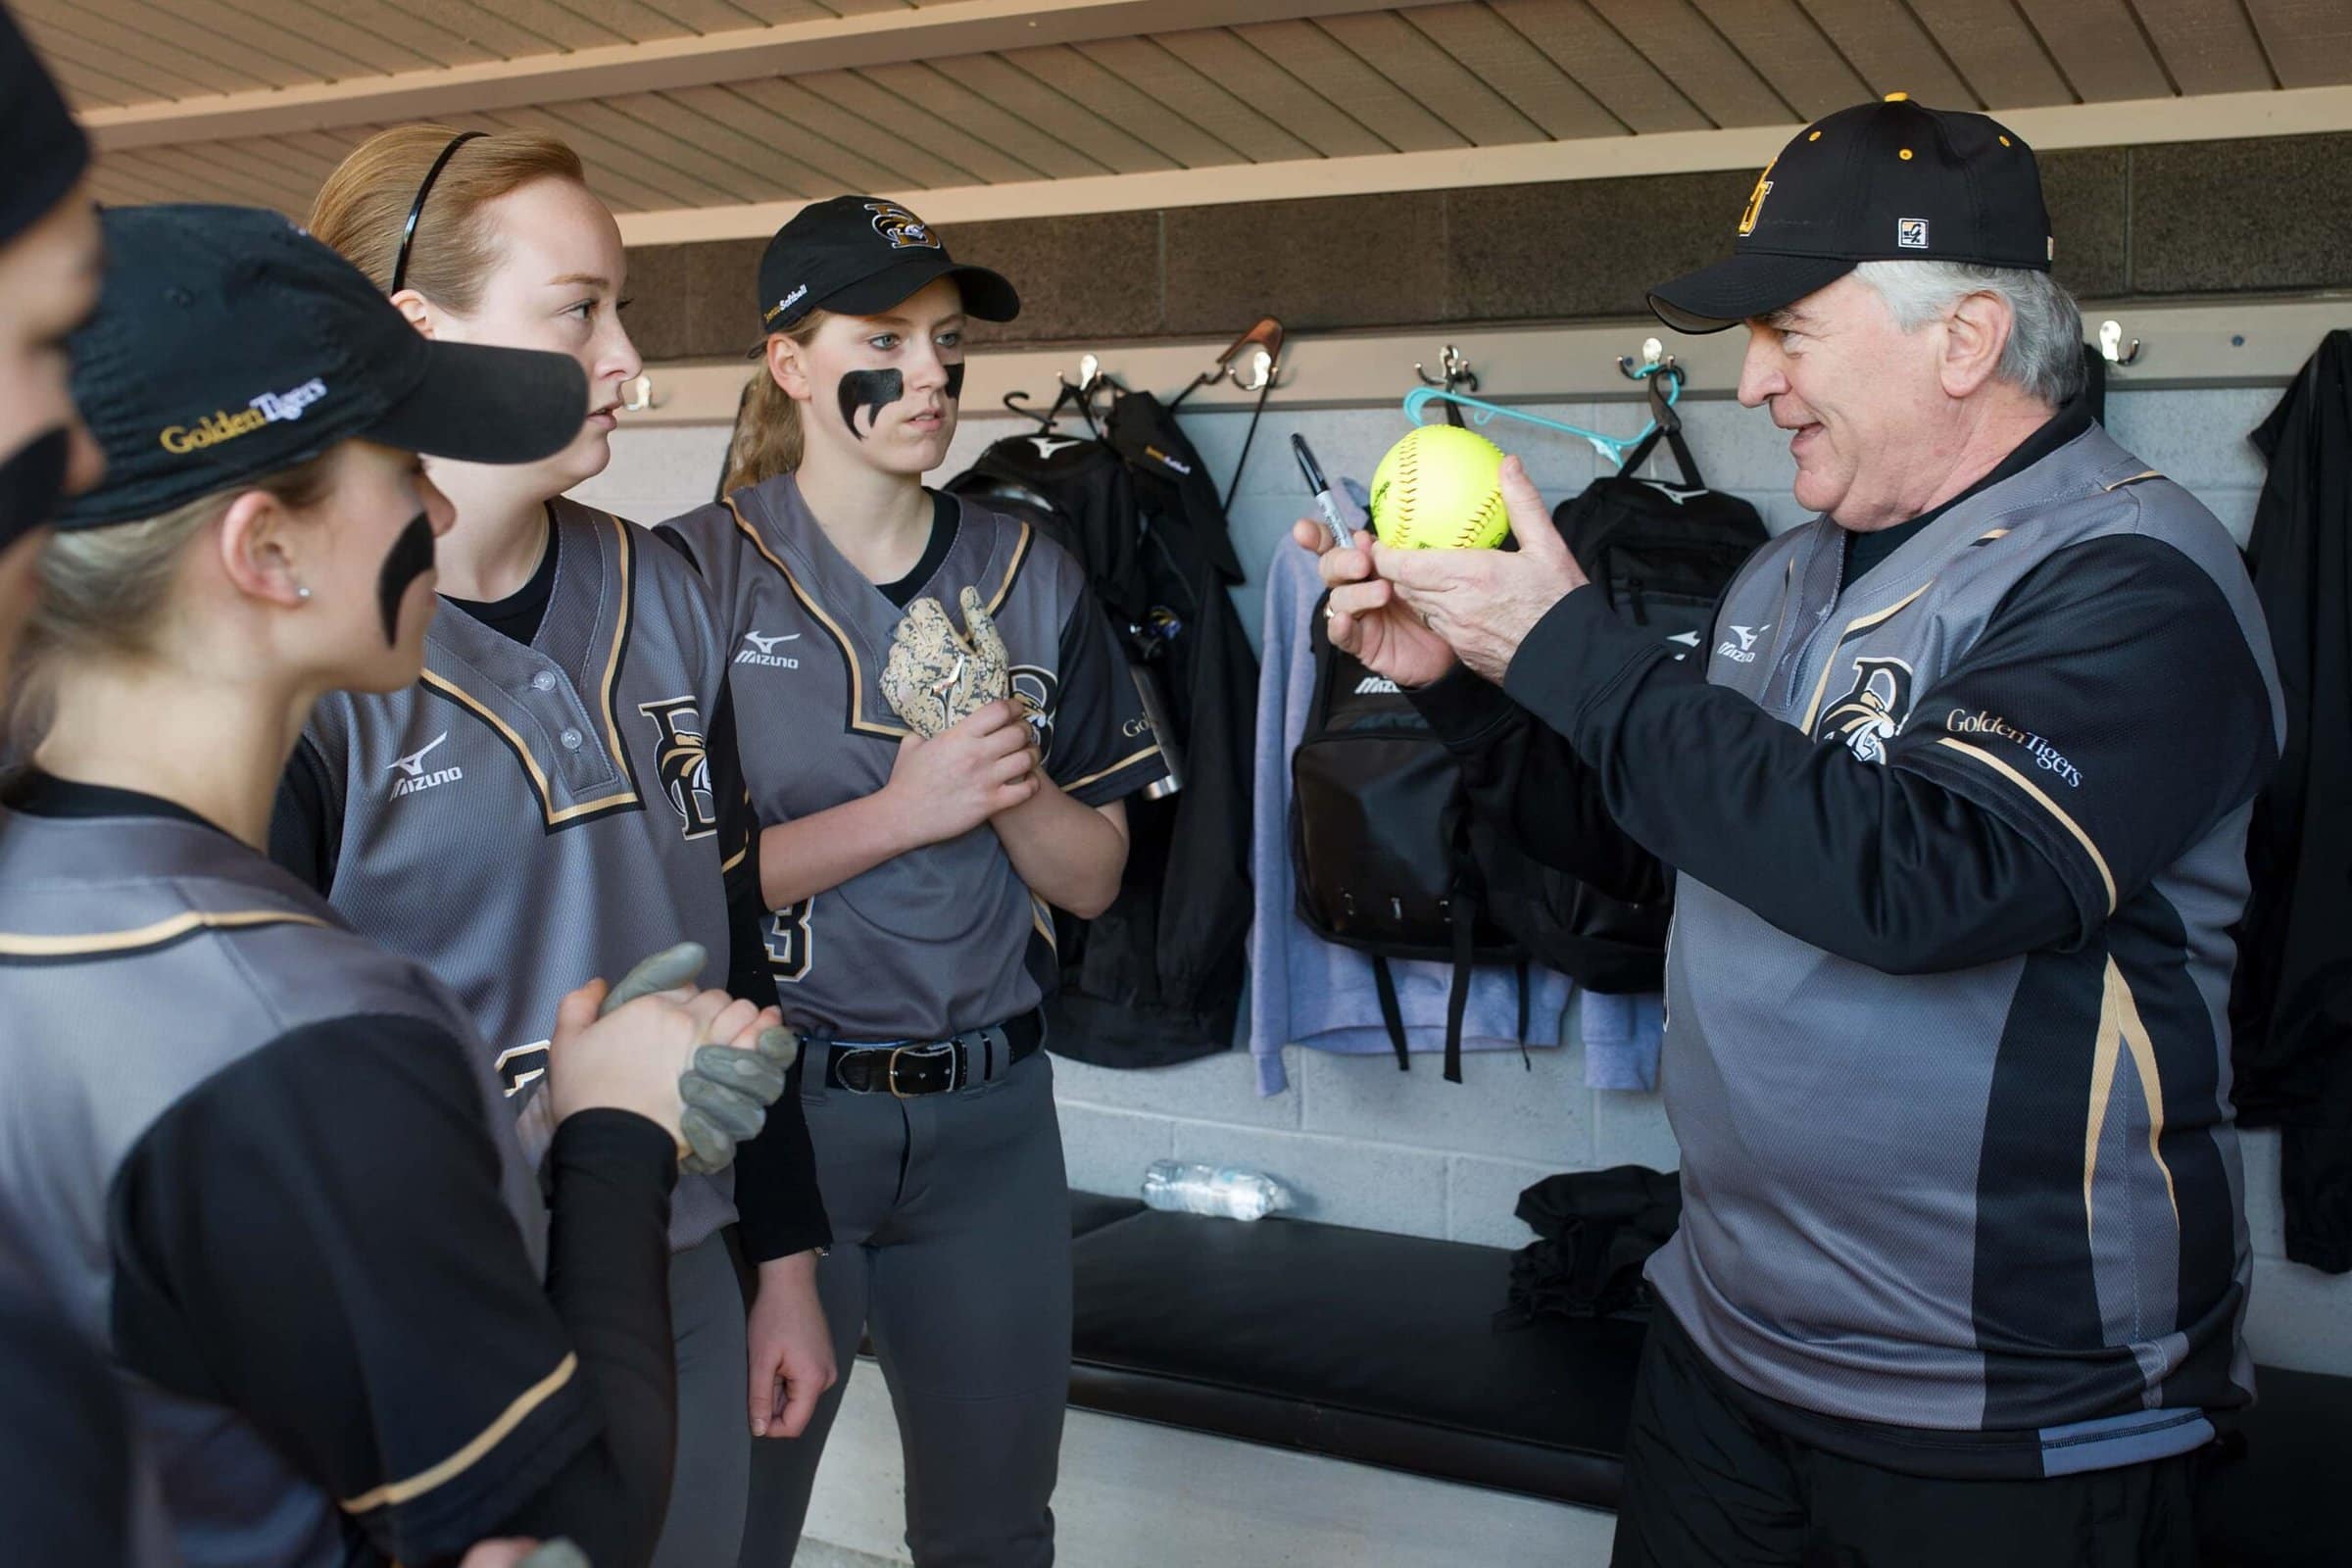 Brenau President Ed Schrader asks softball players to sign a ball to be placed in the Brenau archives to commemorate the first games at Pacolet Milliken Field at the Ernest Ledford Grindle Athletics Park between the Brenau Golden Tigers and Talladega College. (AJ Reynolds/Brenau University)